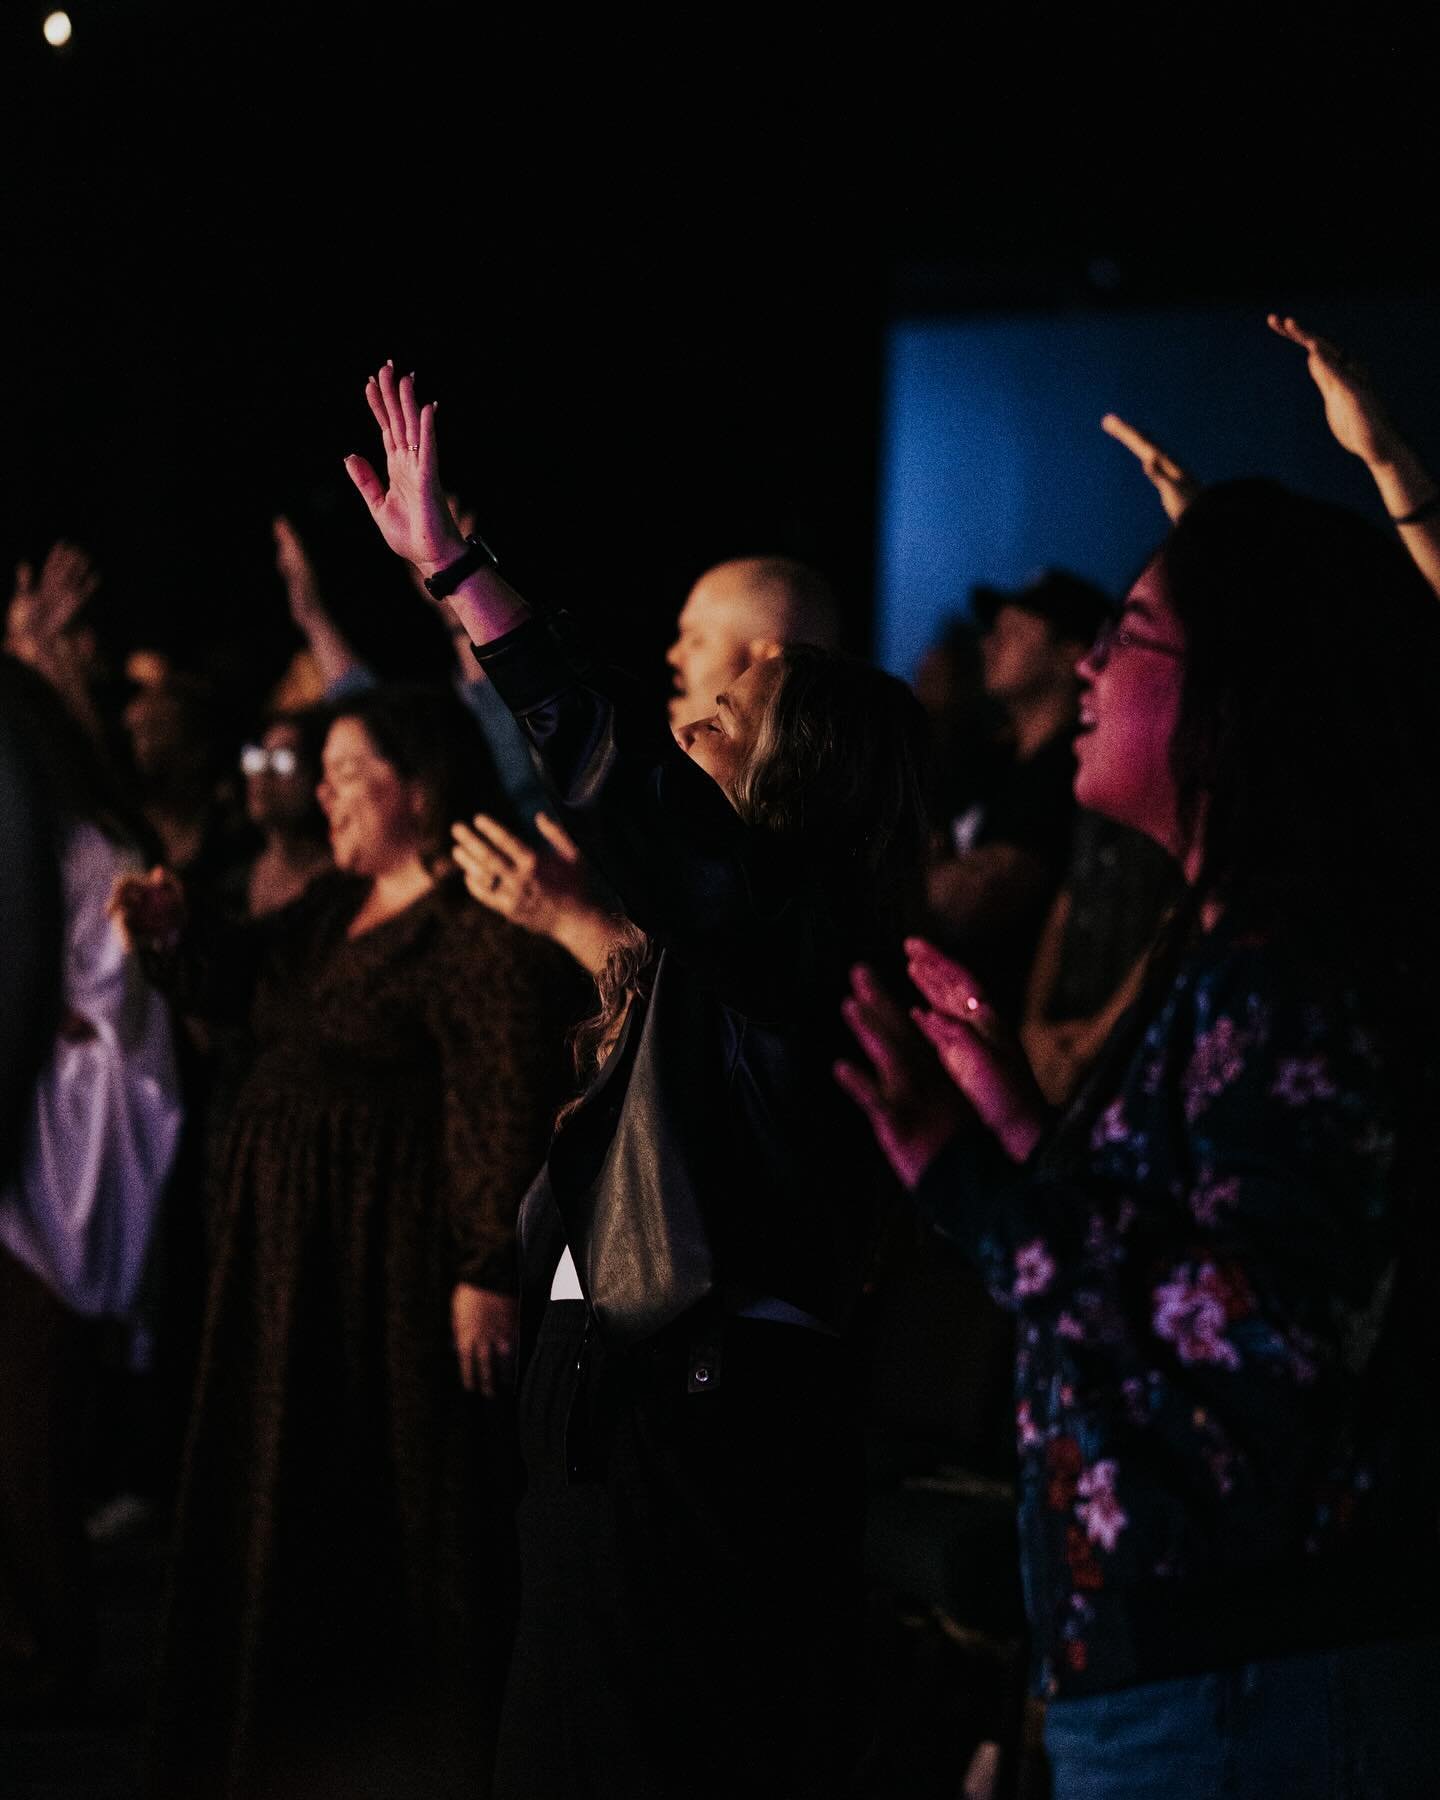 TOMORROW IS THE BEST DAY OF THE WEEK! DO EVERYTHING YOU CAN TO BE IN THE ROOM!

Come ready and expectant for God to move. We also have Encounter Night happening at 6pm that you can&rsquo;t miss out on!

We can&rsquo;t wait to see you for the 10am and